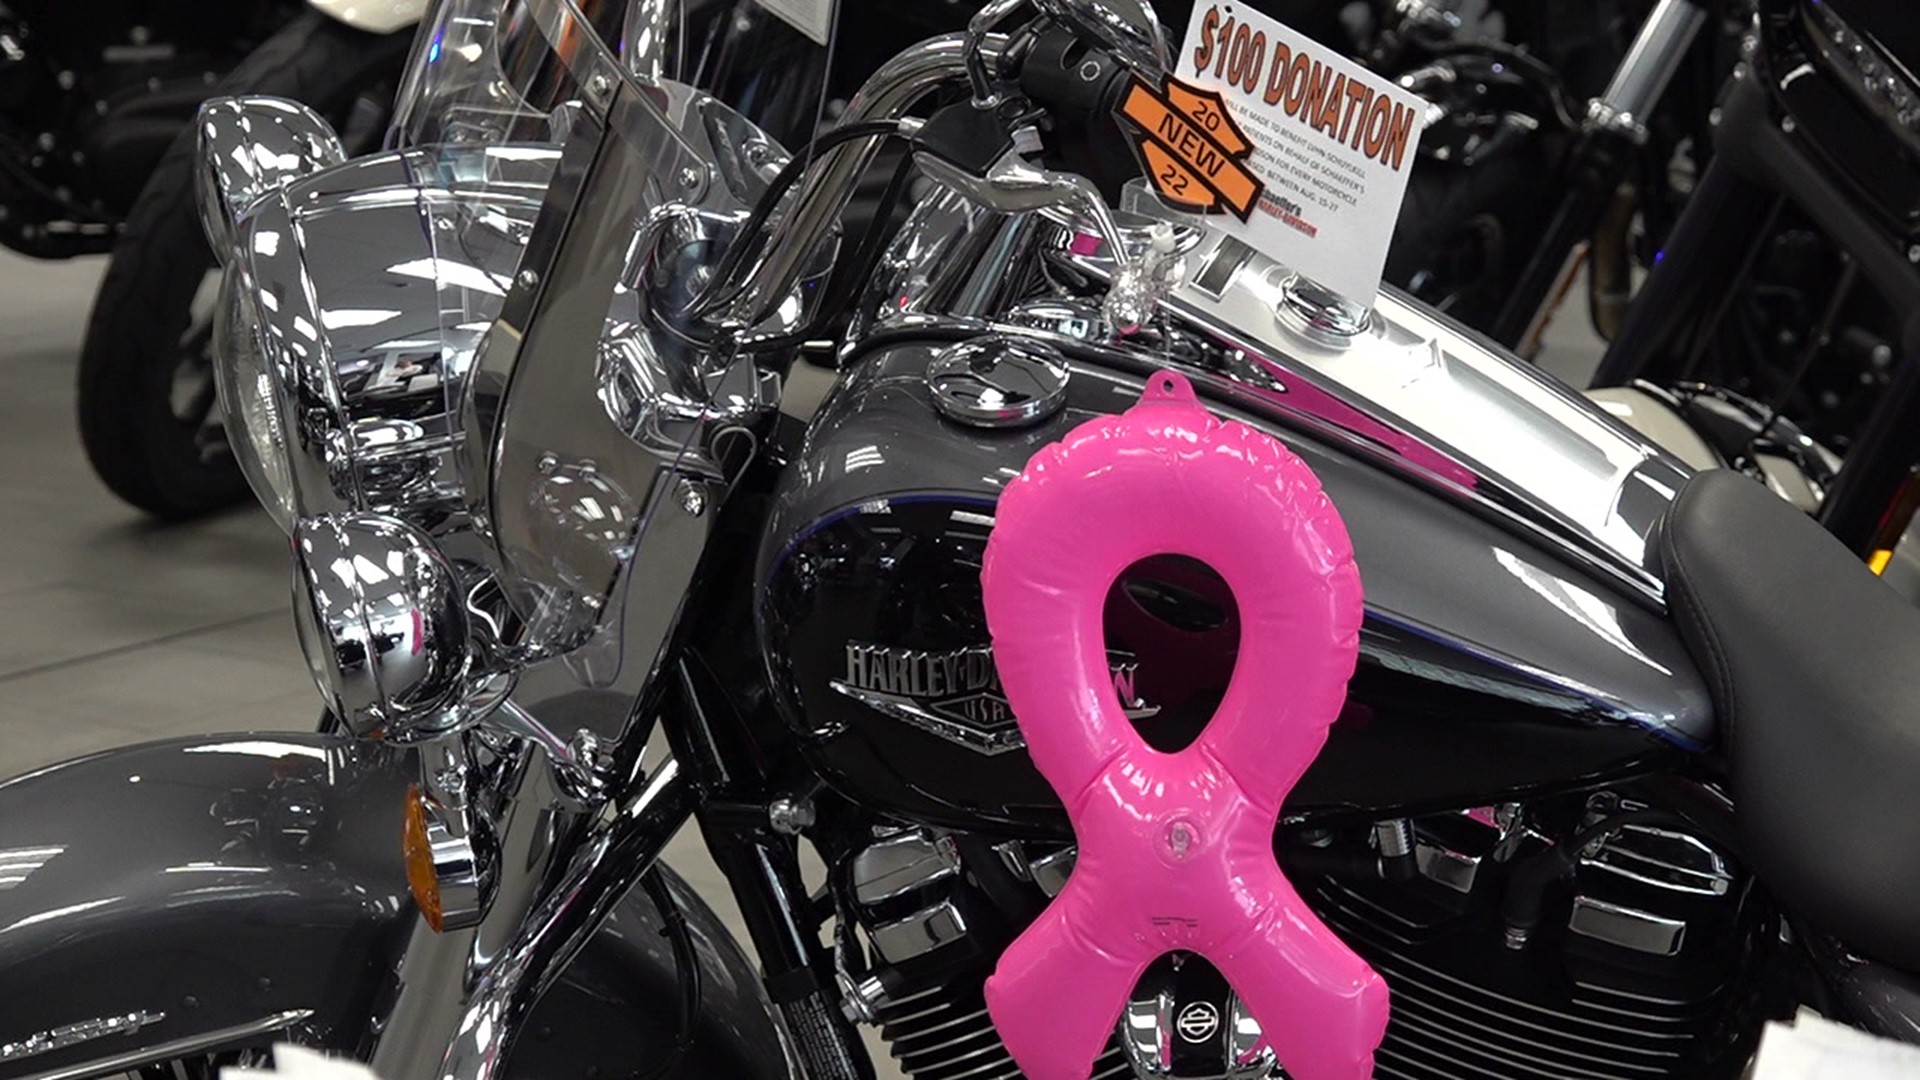 A cancer survivor is partnering up with Schaeffer's Harley-Davidson to raise money for cancer patients in Schuylkill County.